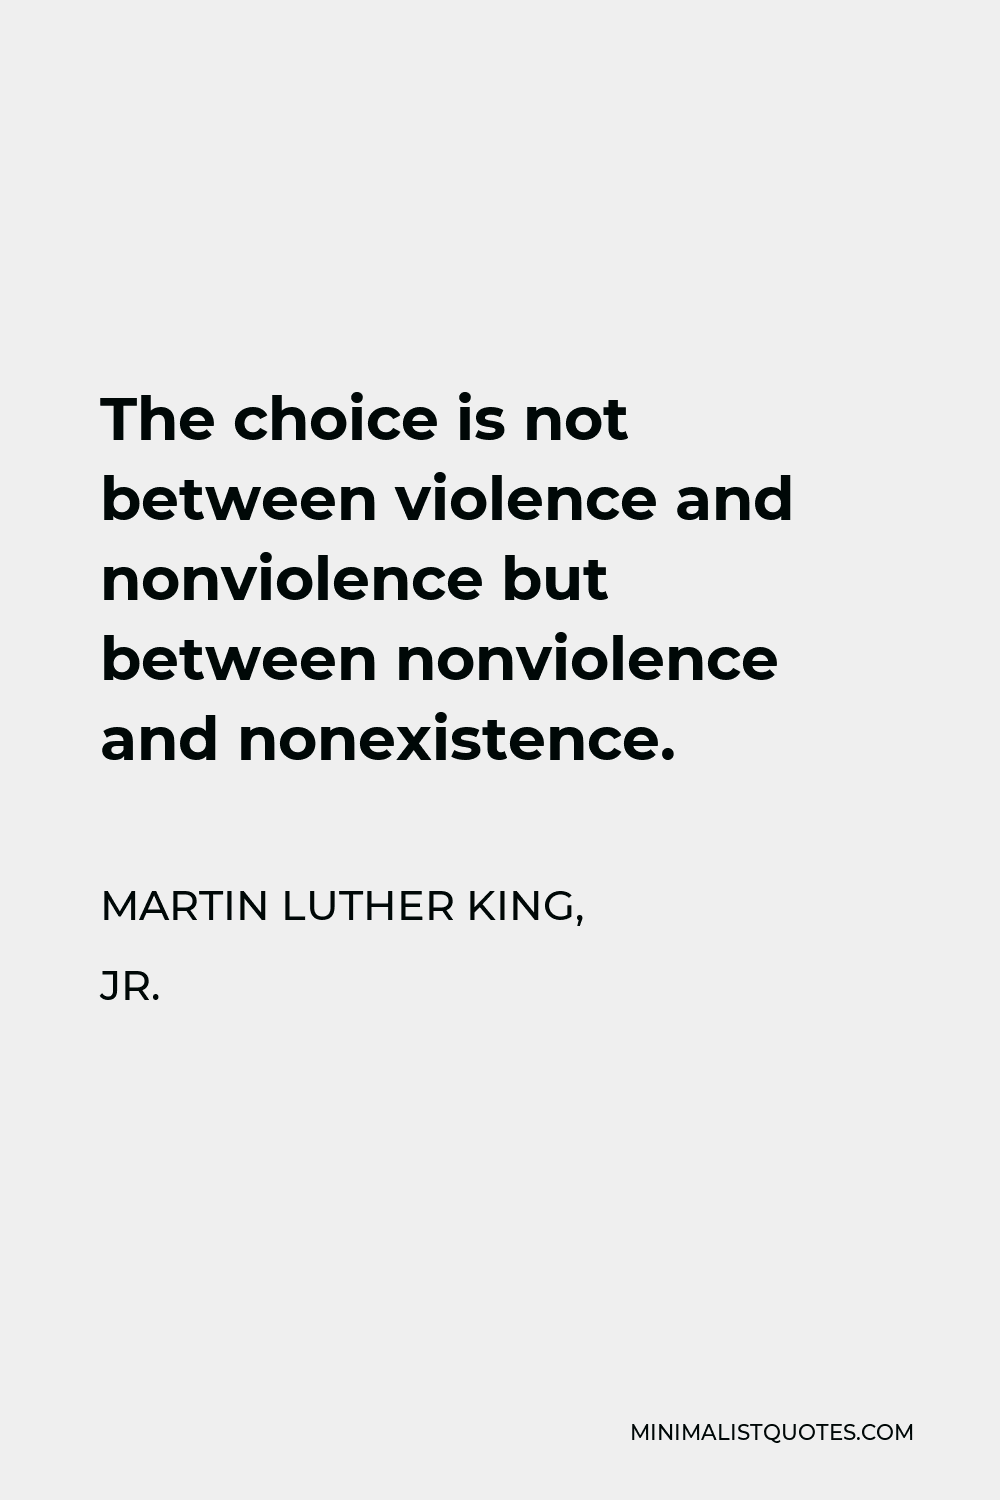 Martin Luther King, Jr. Quote - The choice is not between violence and nonviolence but between nonviolence and nonexistence.